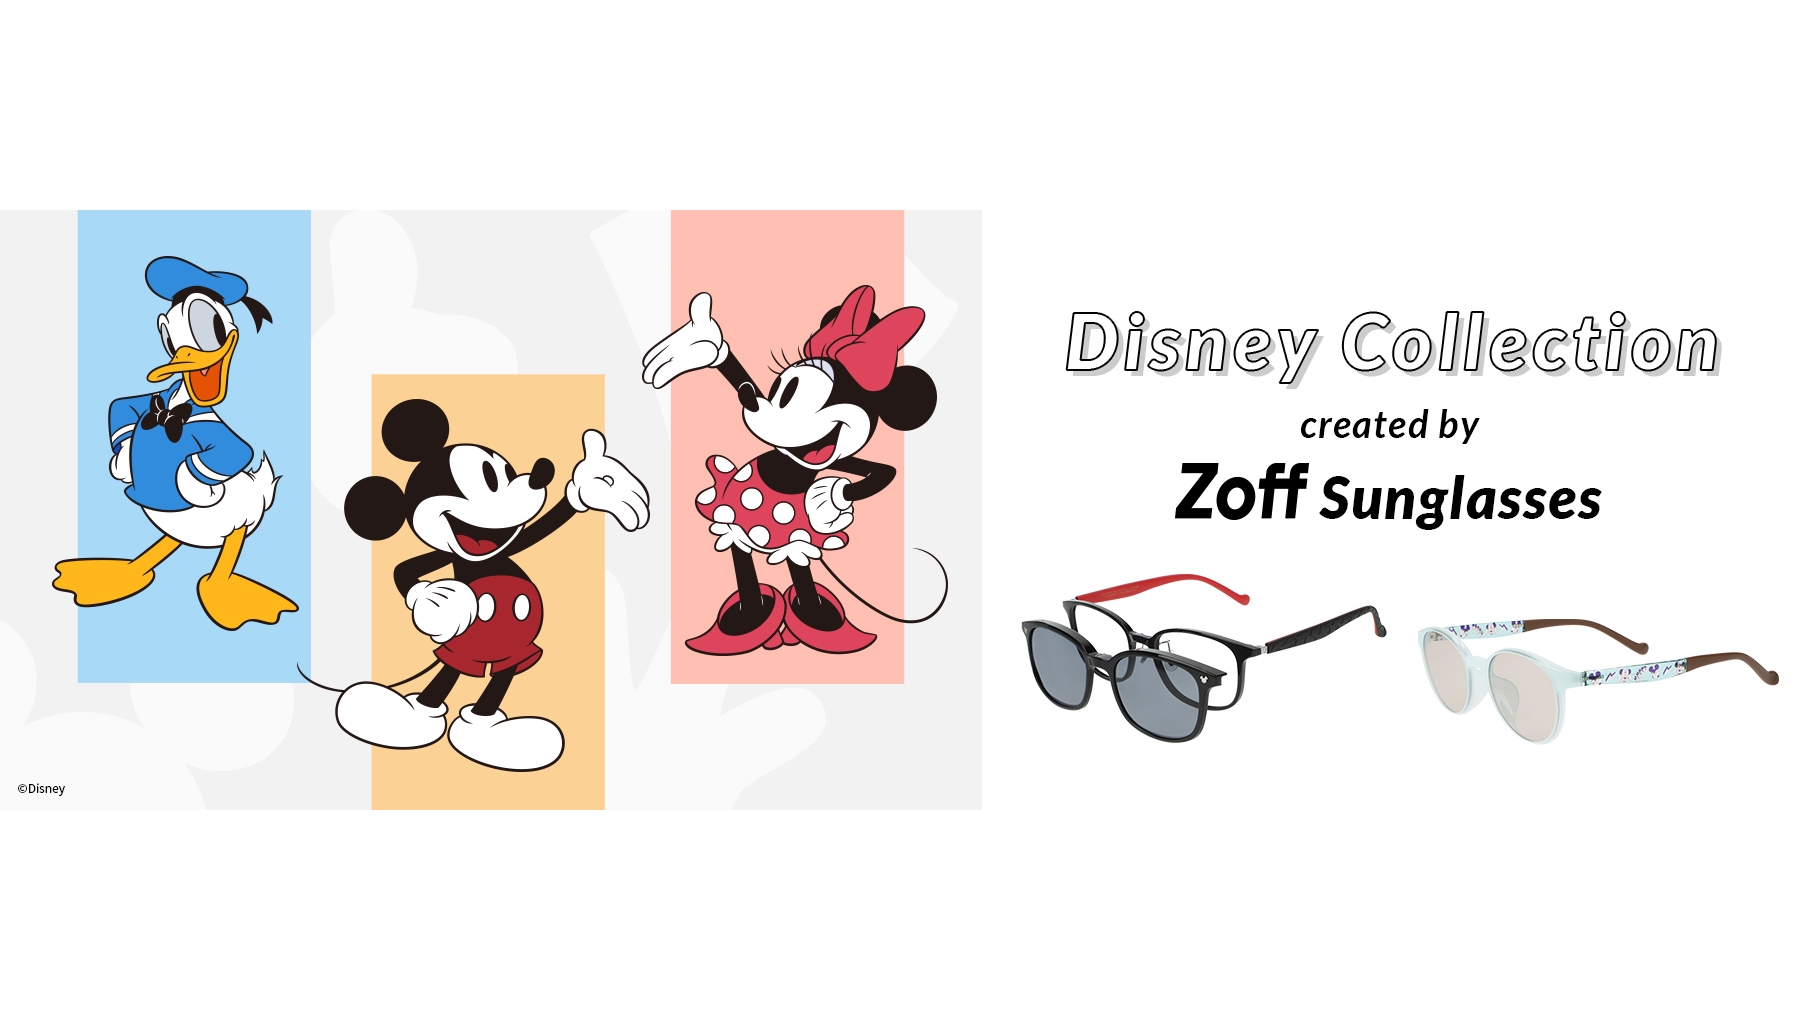 disney-collection-created-by-zoff-sunglasses1